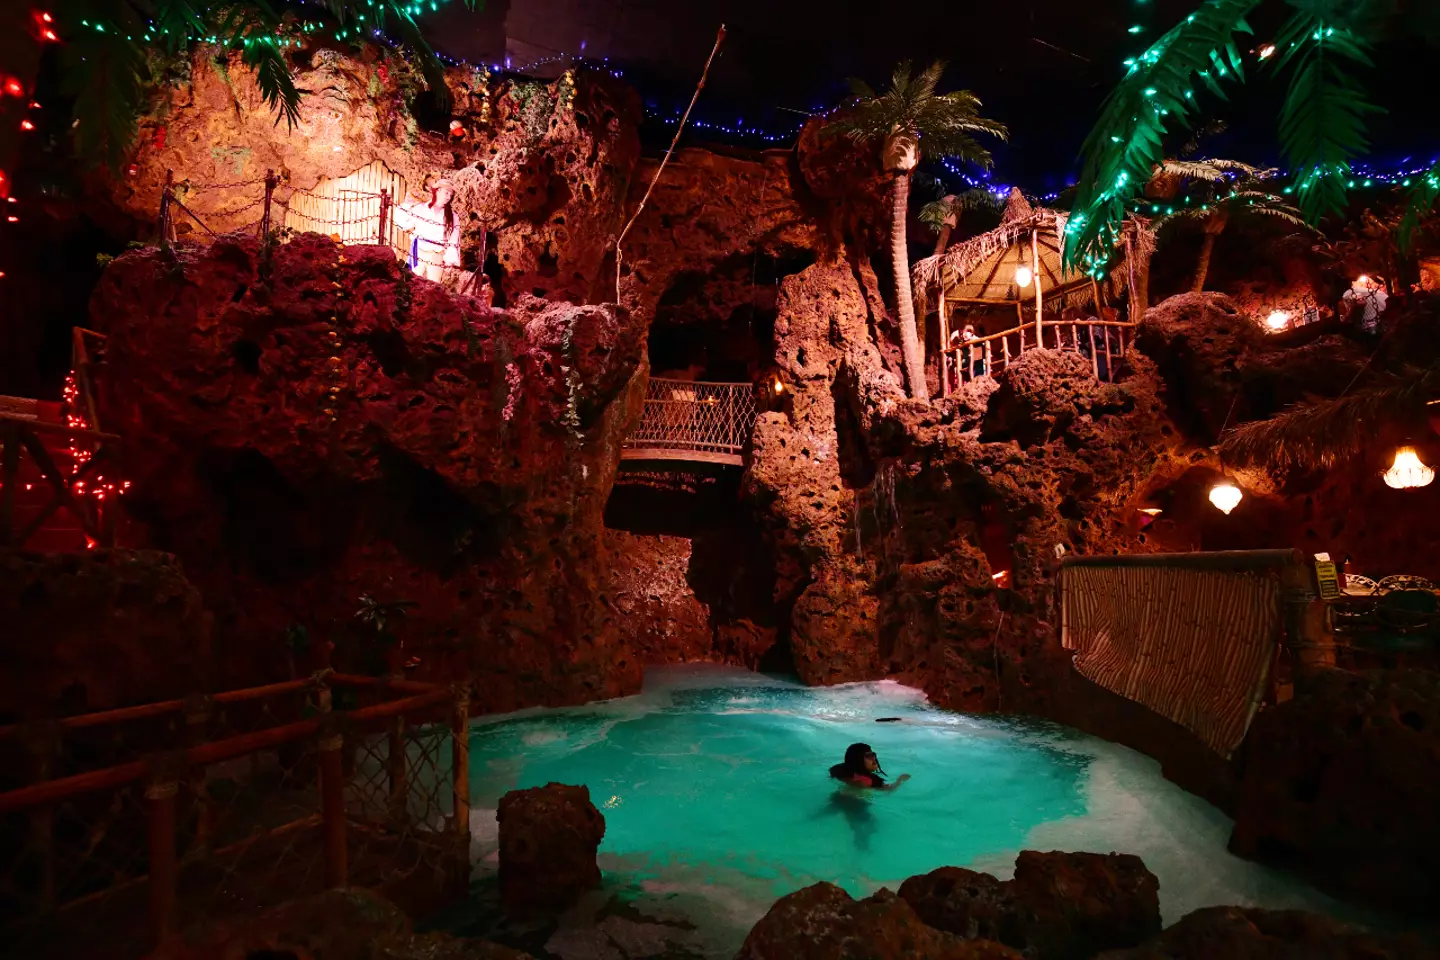 Casa Bonita is known for its gimmicks, including a three-story waterfall.